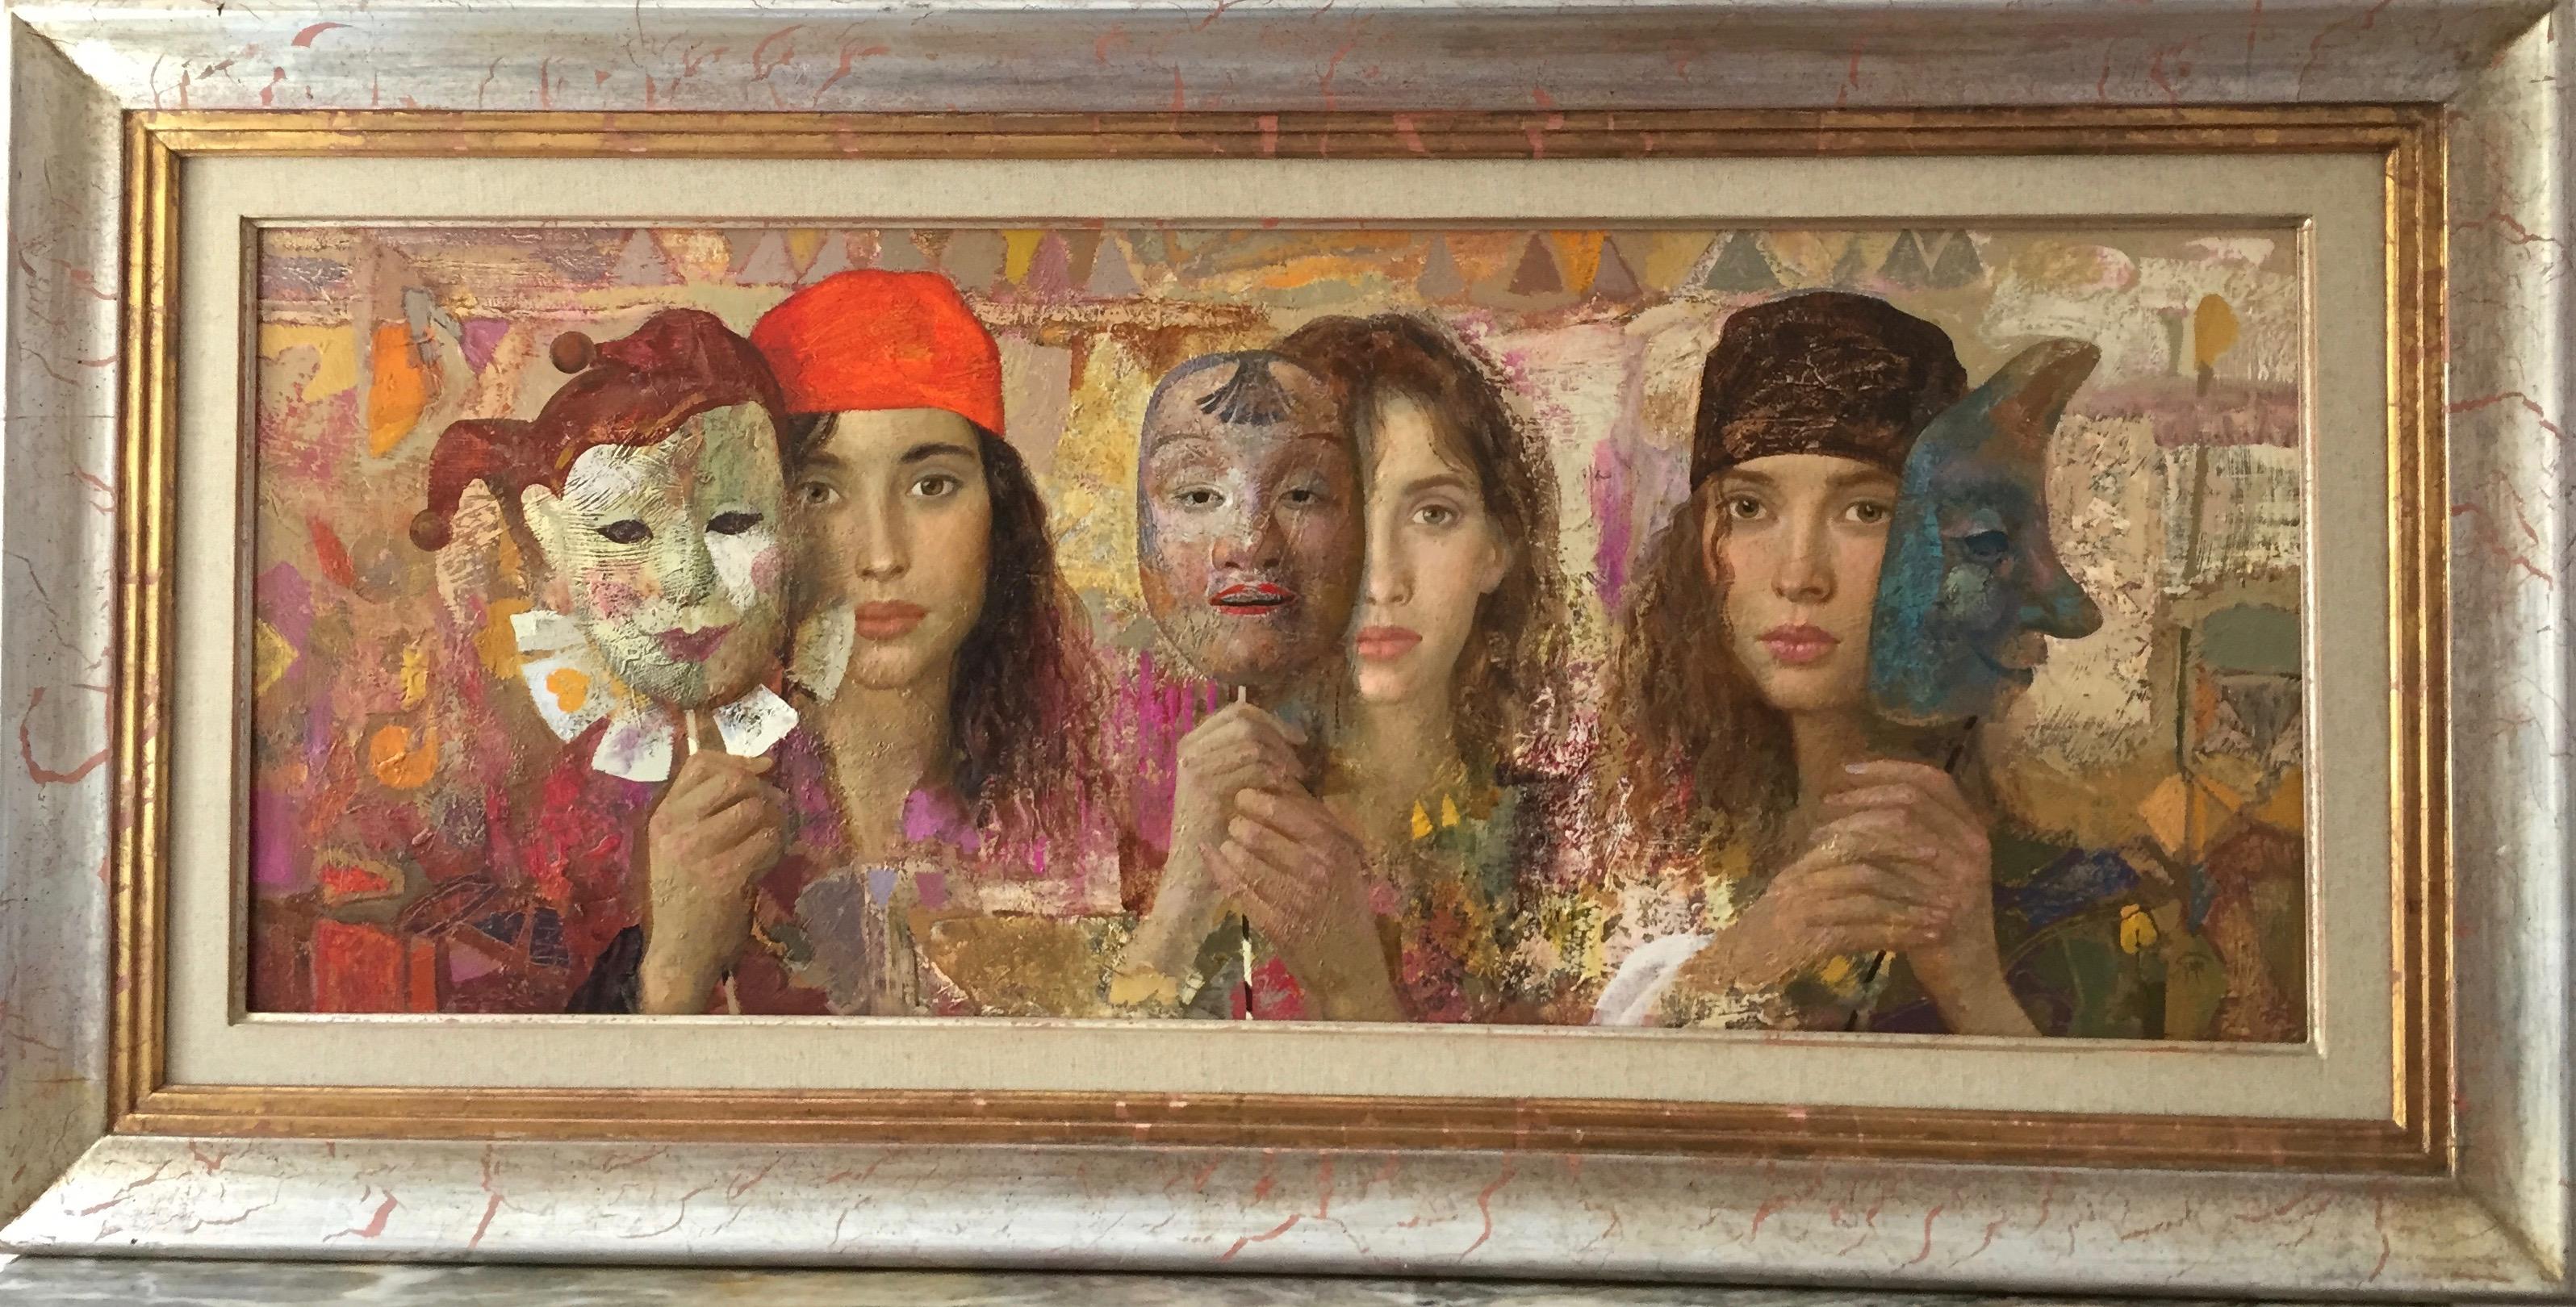 Casting, figurative painting (beautiful women and colorful masks)  - Brown Portrait Painting by Goyo Dominguez